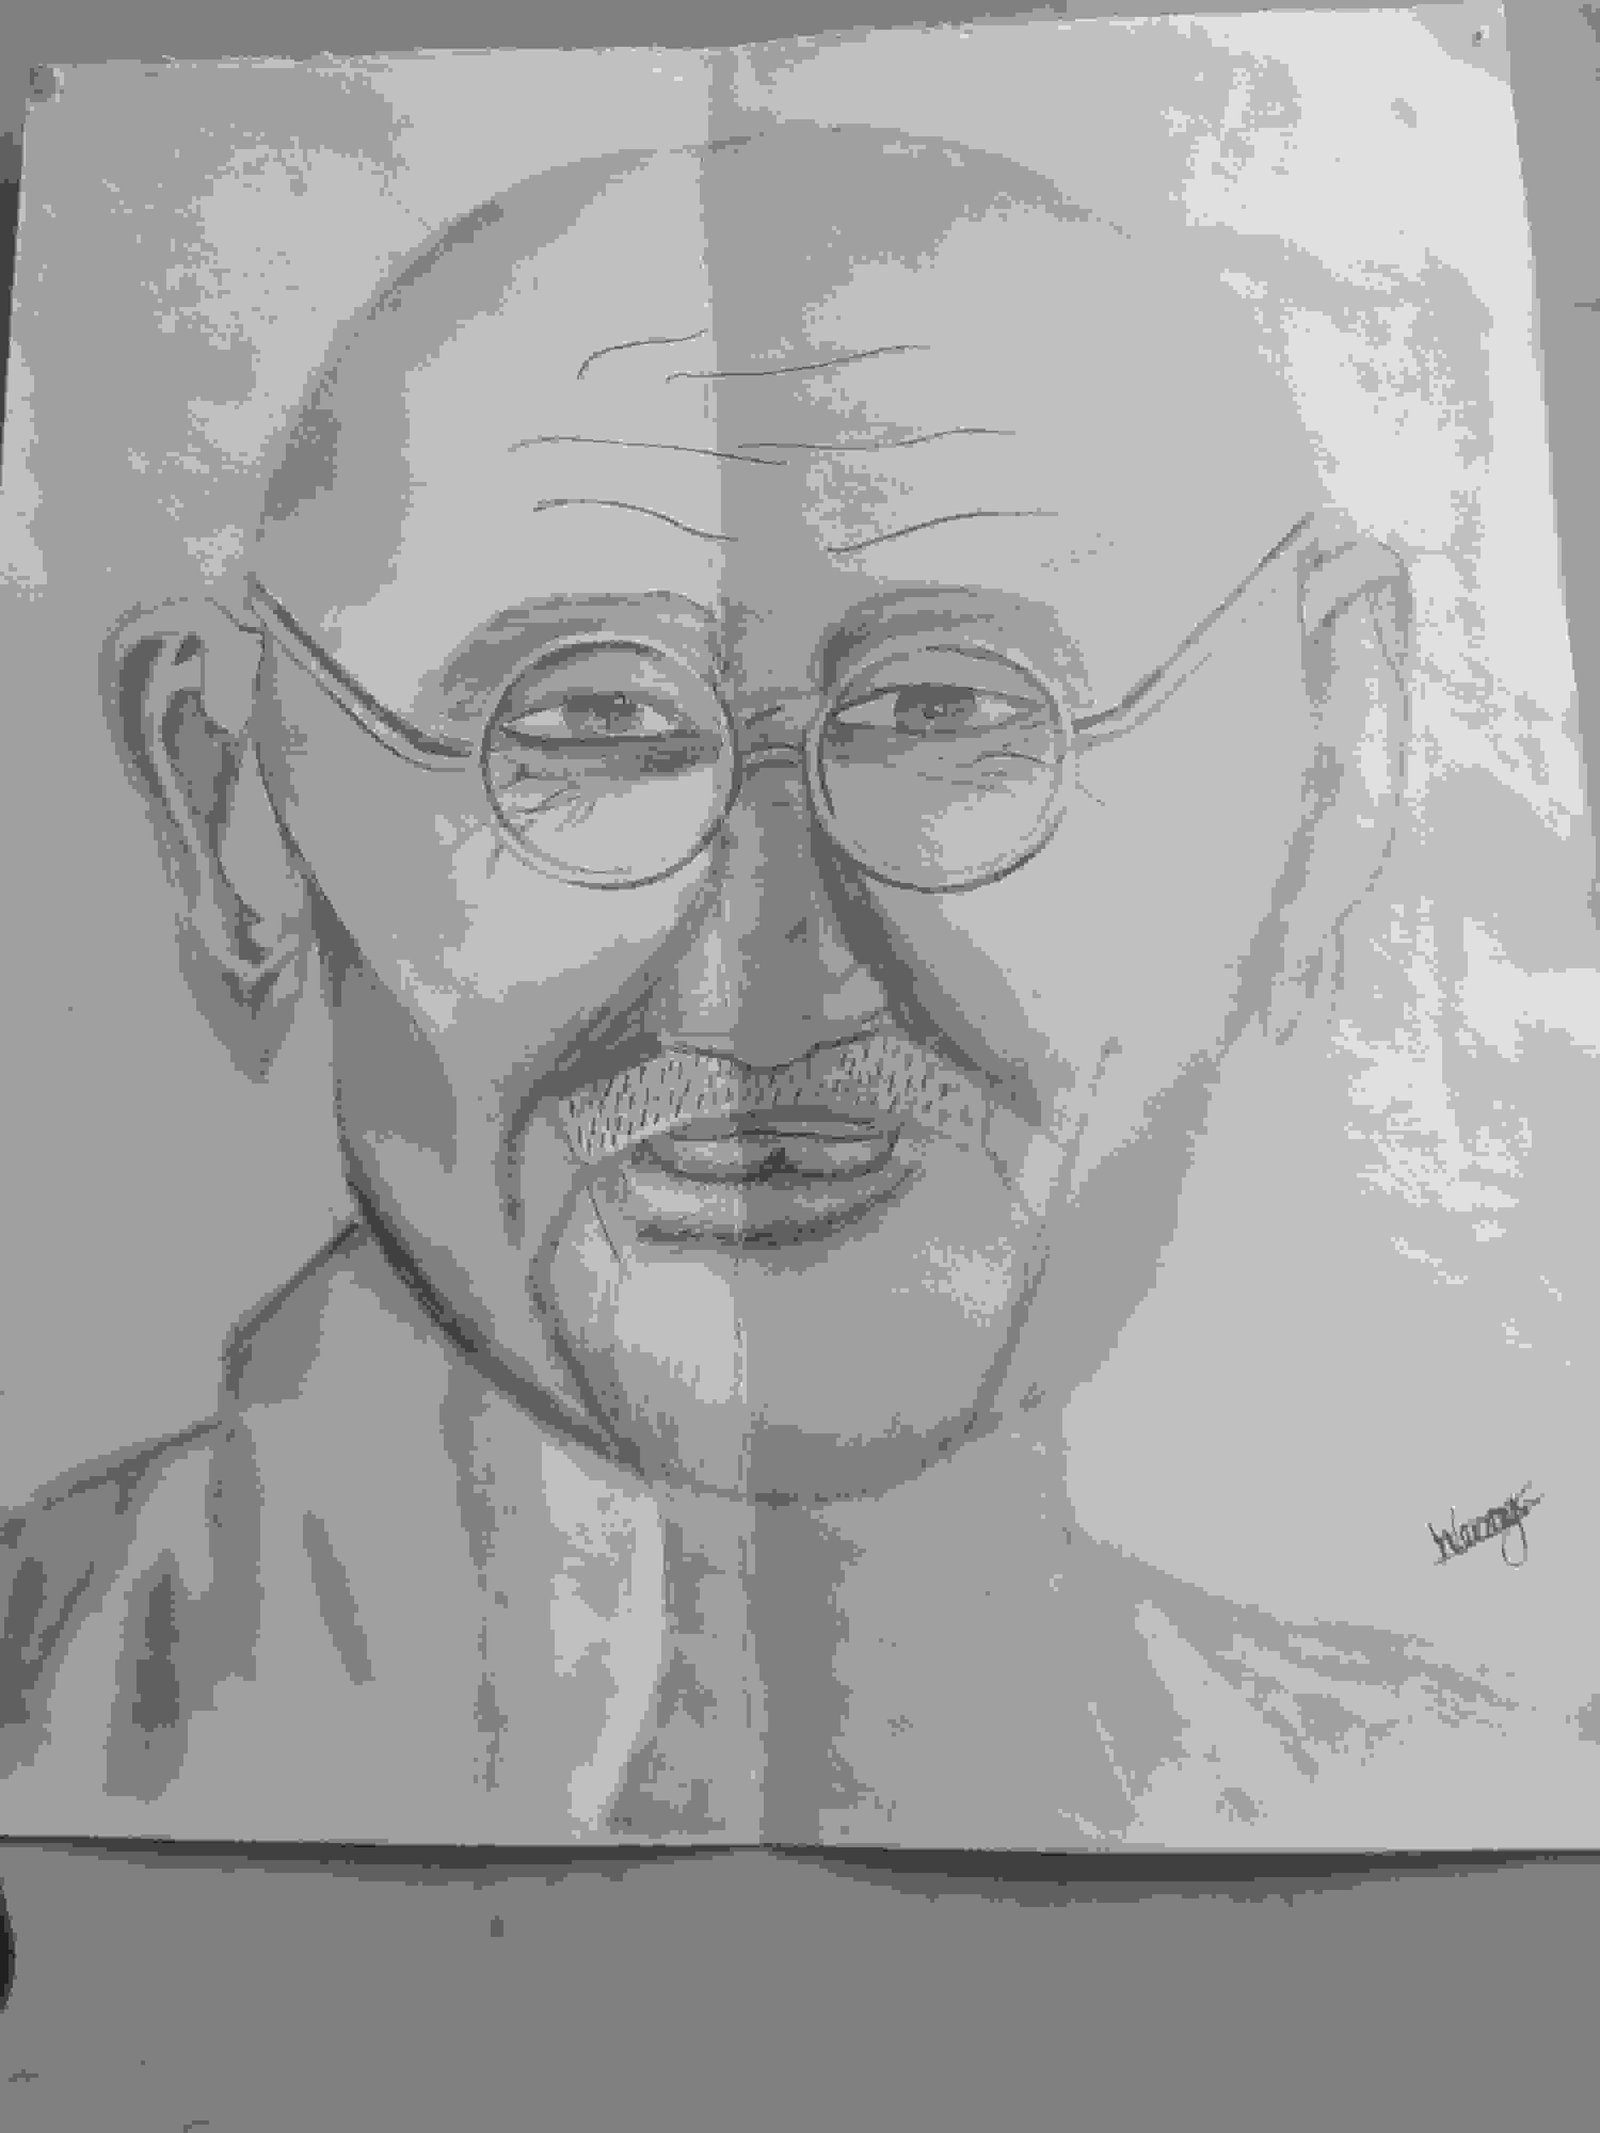 How to Draw Mahatma Gandhi Pencil Shading Step by Step for beginners |  Pencil shading, Drawings, Easy drawings